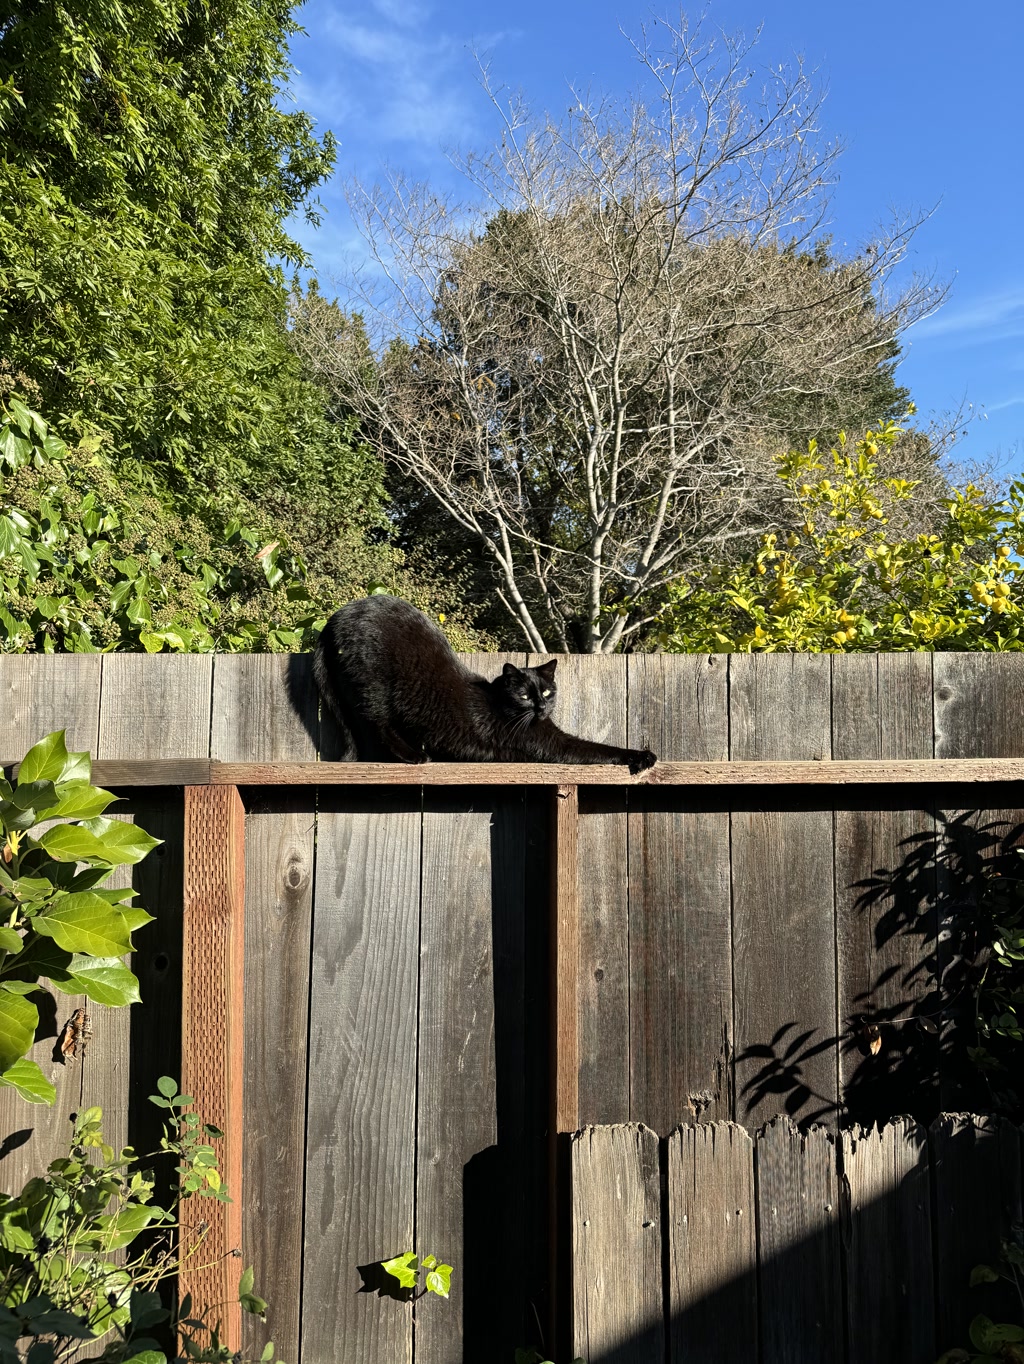 A black cat is perched on a weathered wooden fence, gazing outwards. The fence is lined with lush green foliage on the left and the shadows of leaves are cast on the fence by the bright sunlight. Behind the fence, a tree with bare branches stands against a clear blue sky. Specks of yellow and green vegetation are scattered around, indicating a garden setting in full daylight.